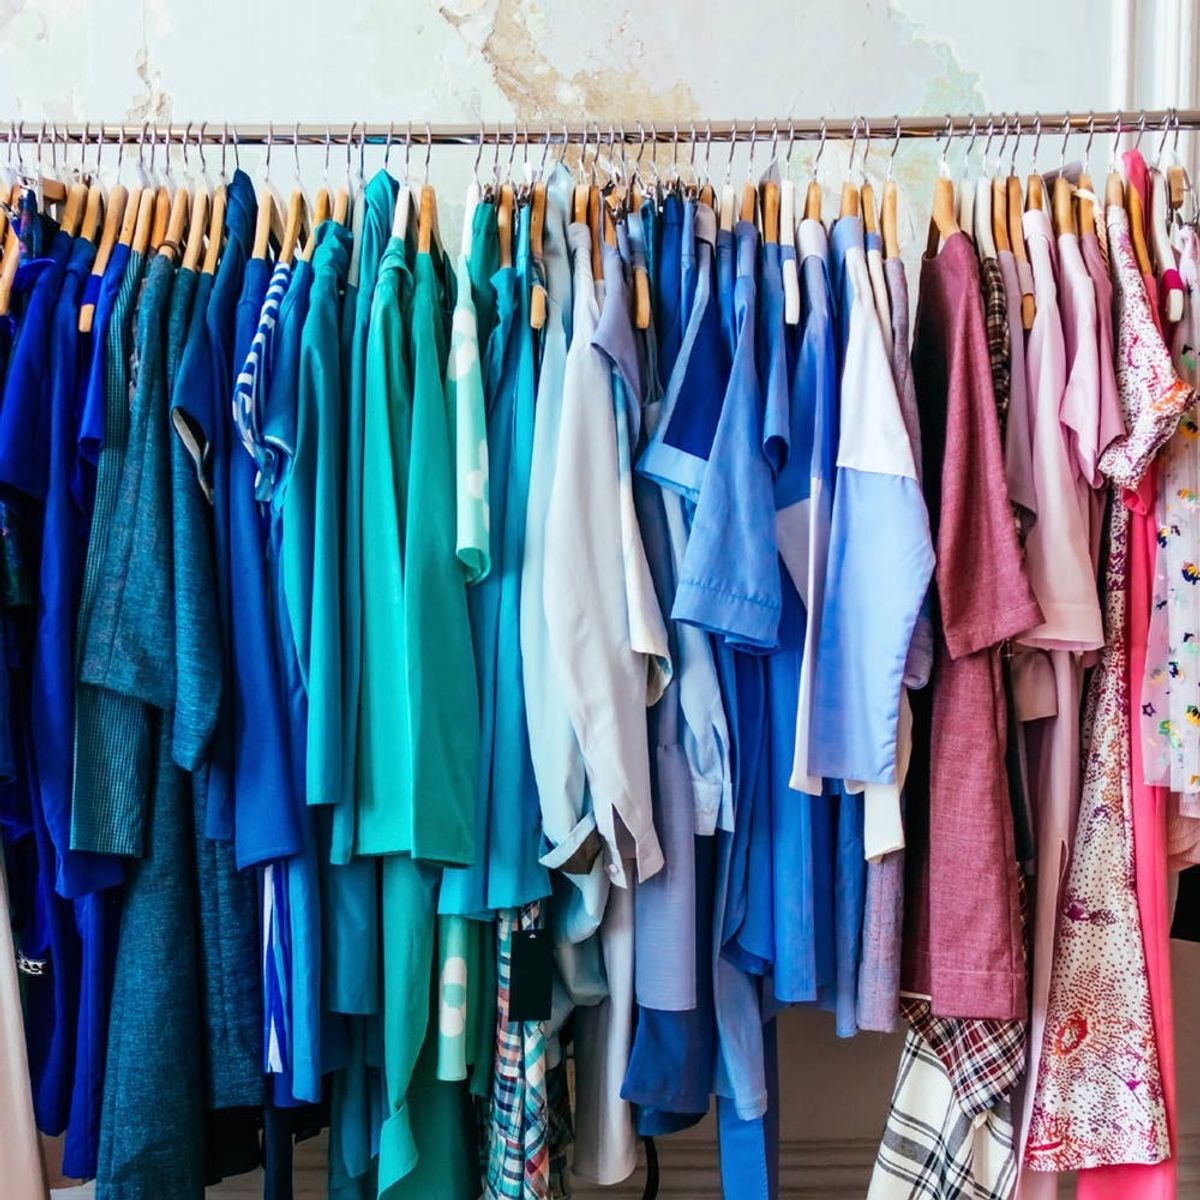 6 Pro Tips to Make Your Clothes Last Longer